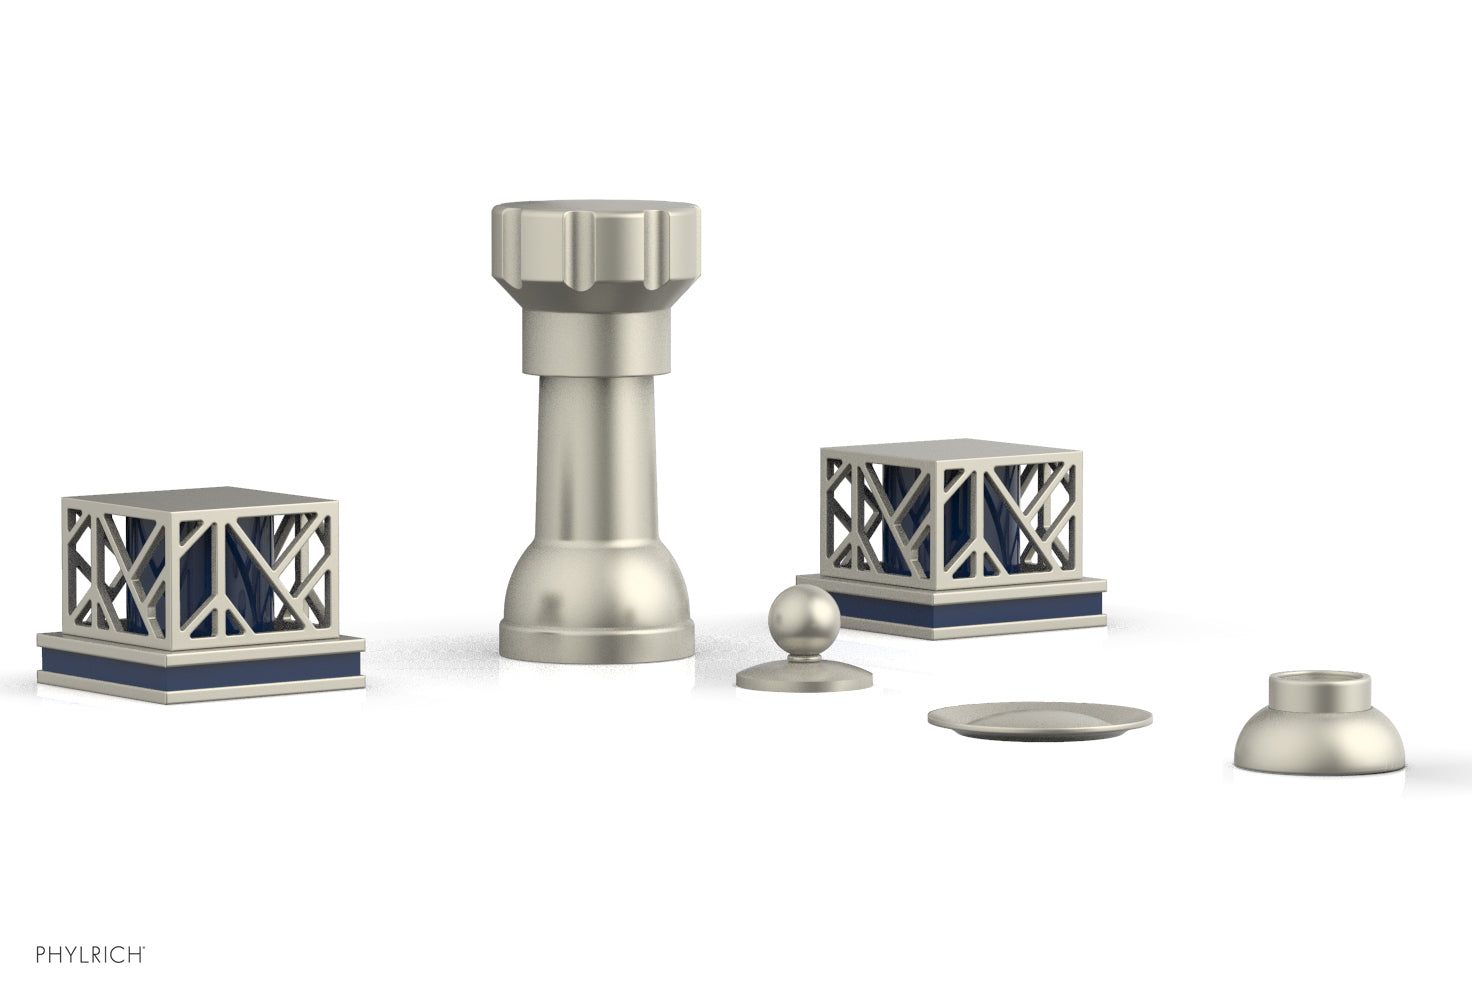 Phylrich JOLIE Four Hole Bidet Set - Square Handles with "Navy Blue Accents"